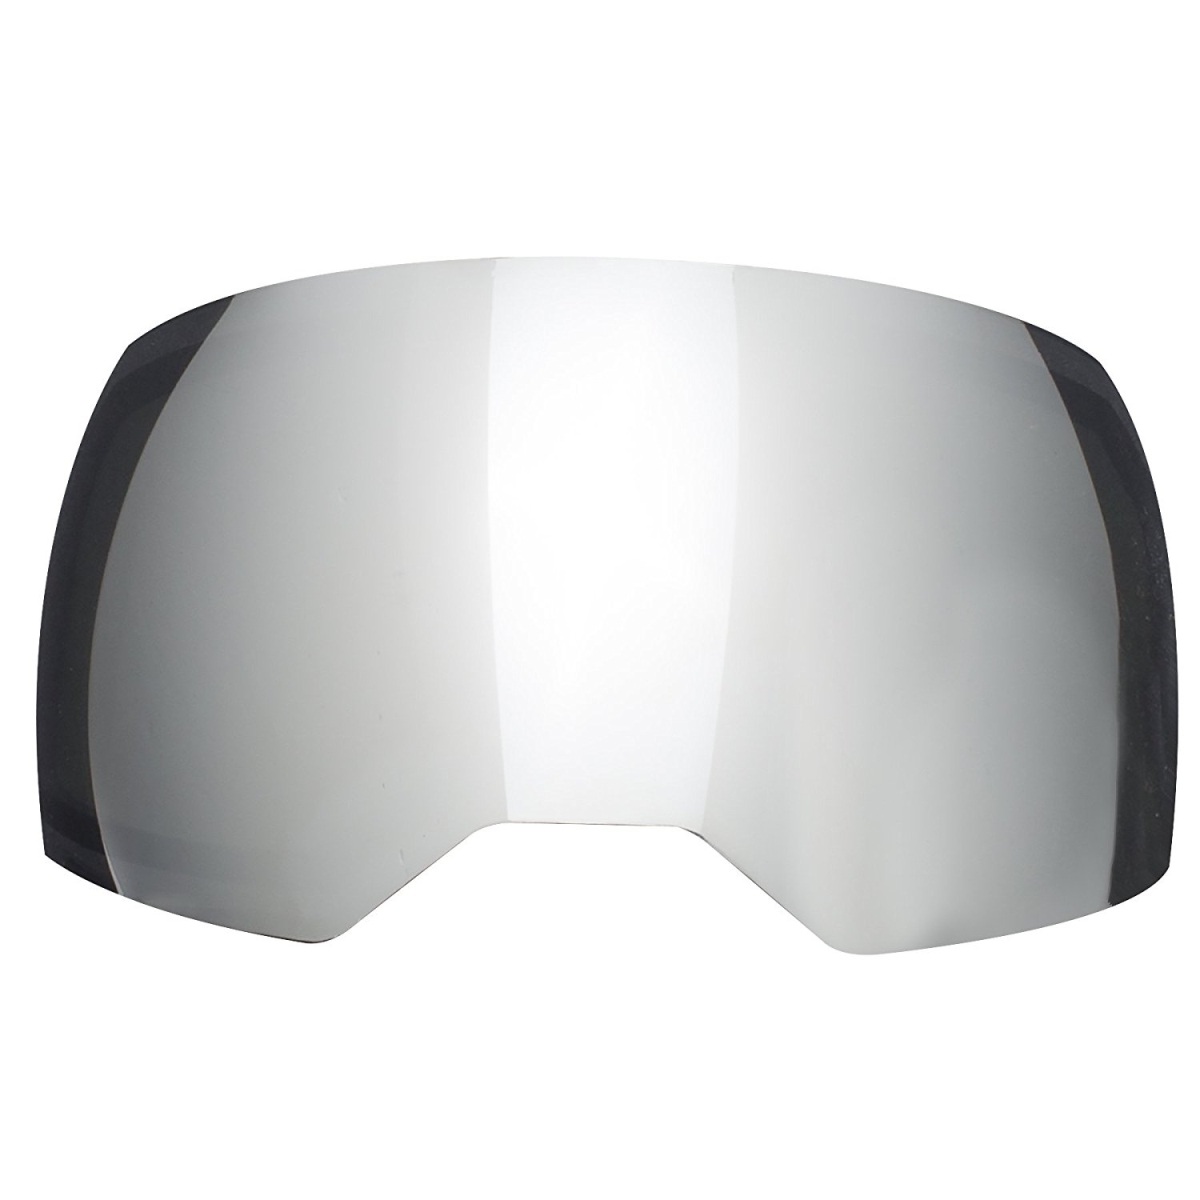 22248 Evs Replacement Lens - Thermal - Silver Mirror